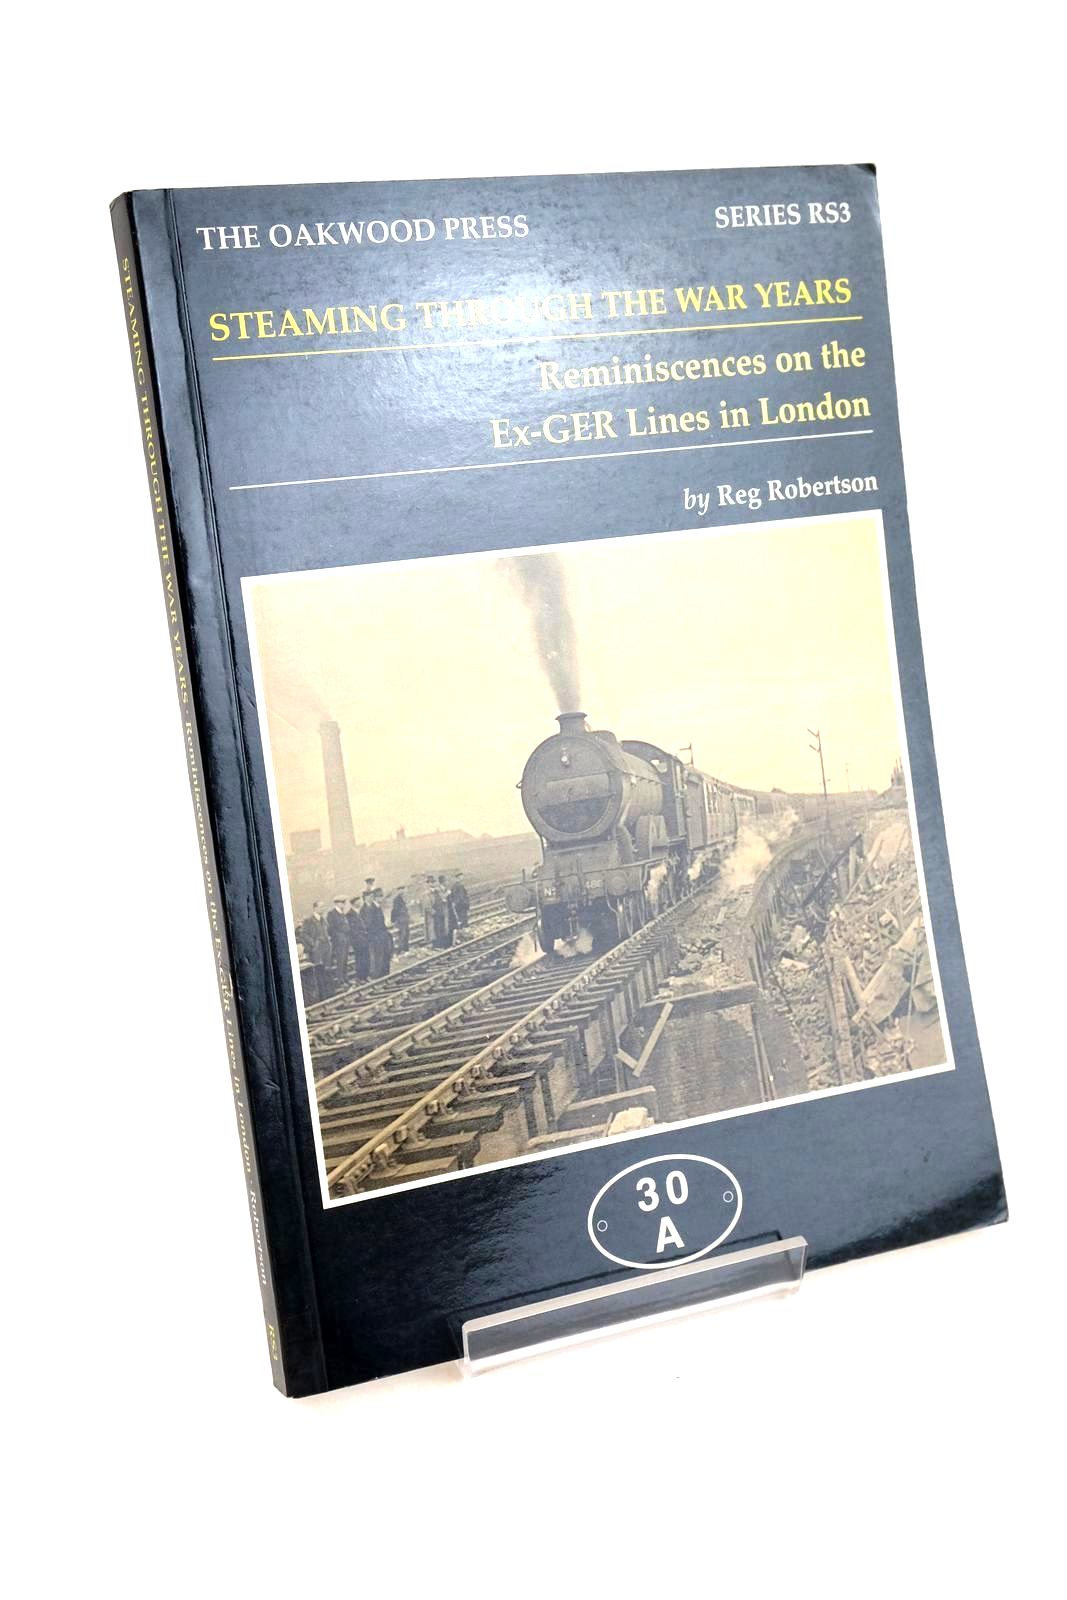 Photo of STEAMING THROUGH THE WAR YEARS REMINISCENCES THE EX-GER LINES IN LONDON written by Robertson, Reg published by The Oakwood Press (STOCK CODE: 1327332)  for sale by Stella & Rose's Books